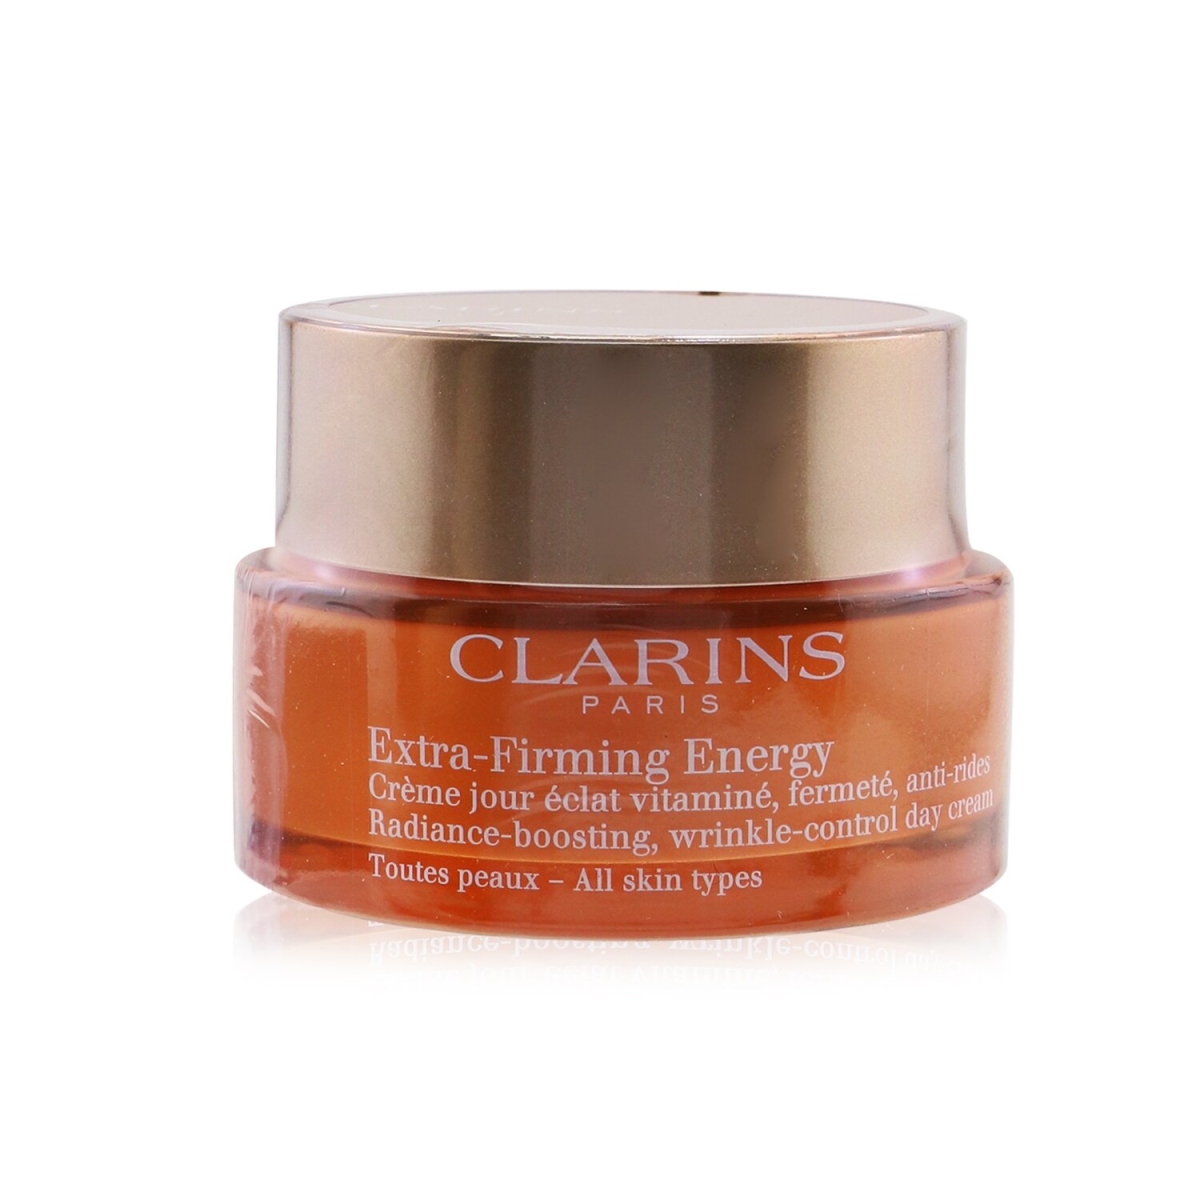 Picture of Clarins 261606 1.7 oz Extra-Firming Energy Radiance-Boosting, Wrinkle-Control Day Cream